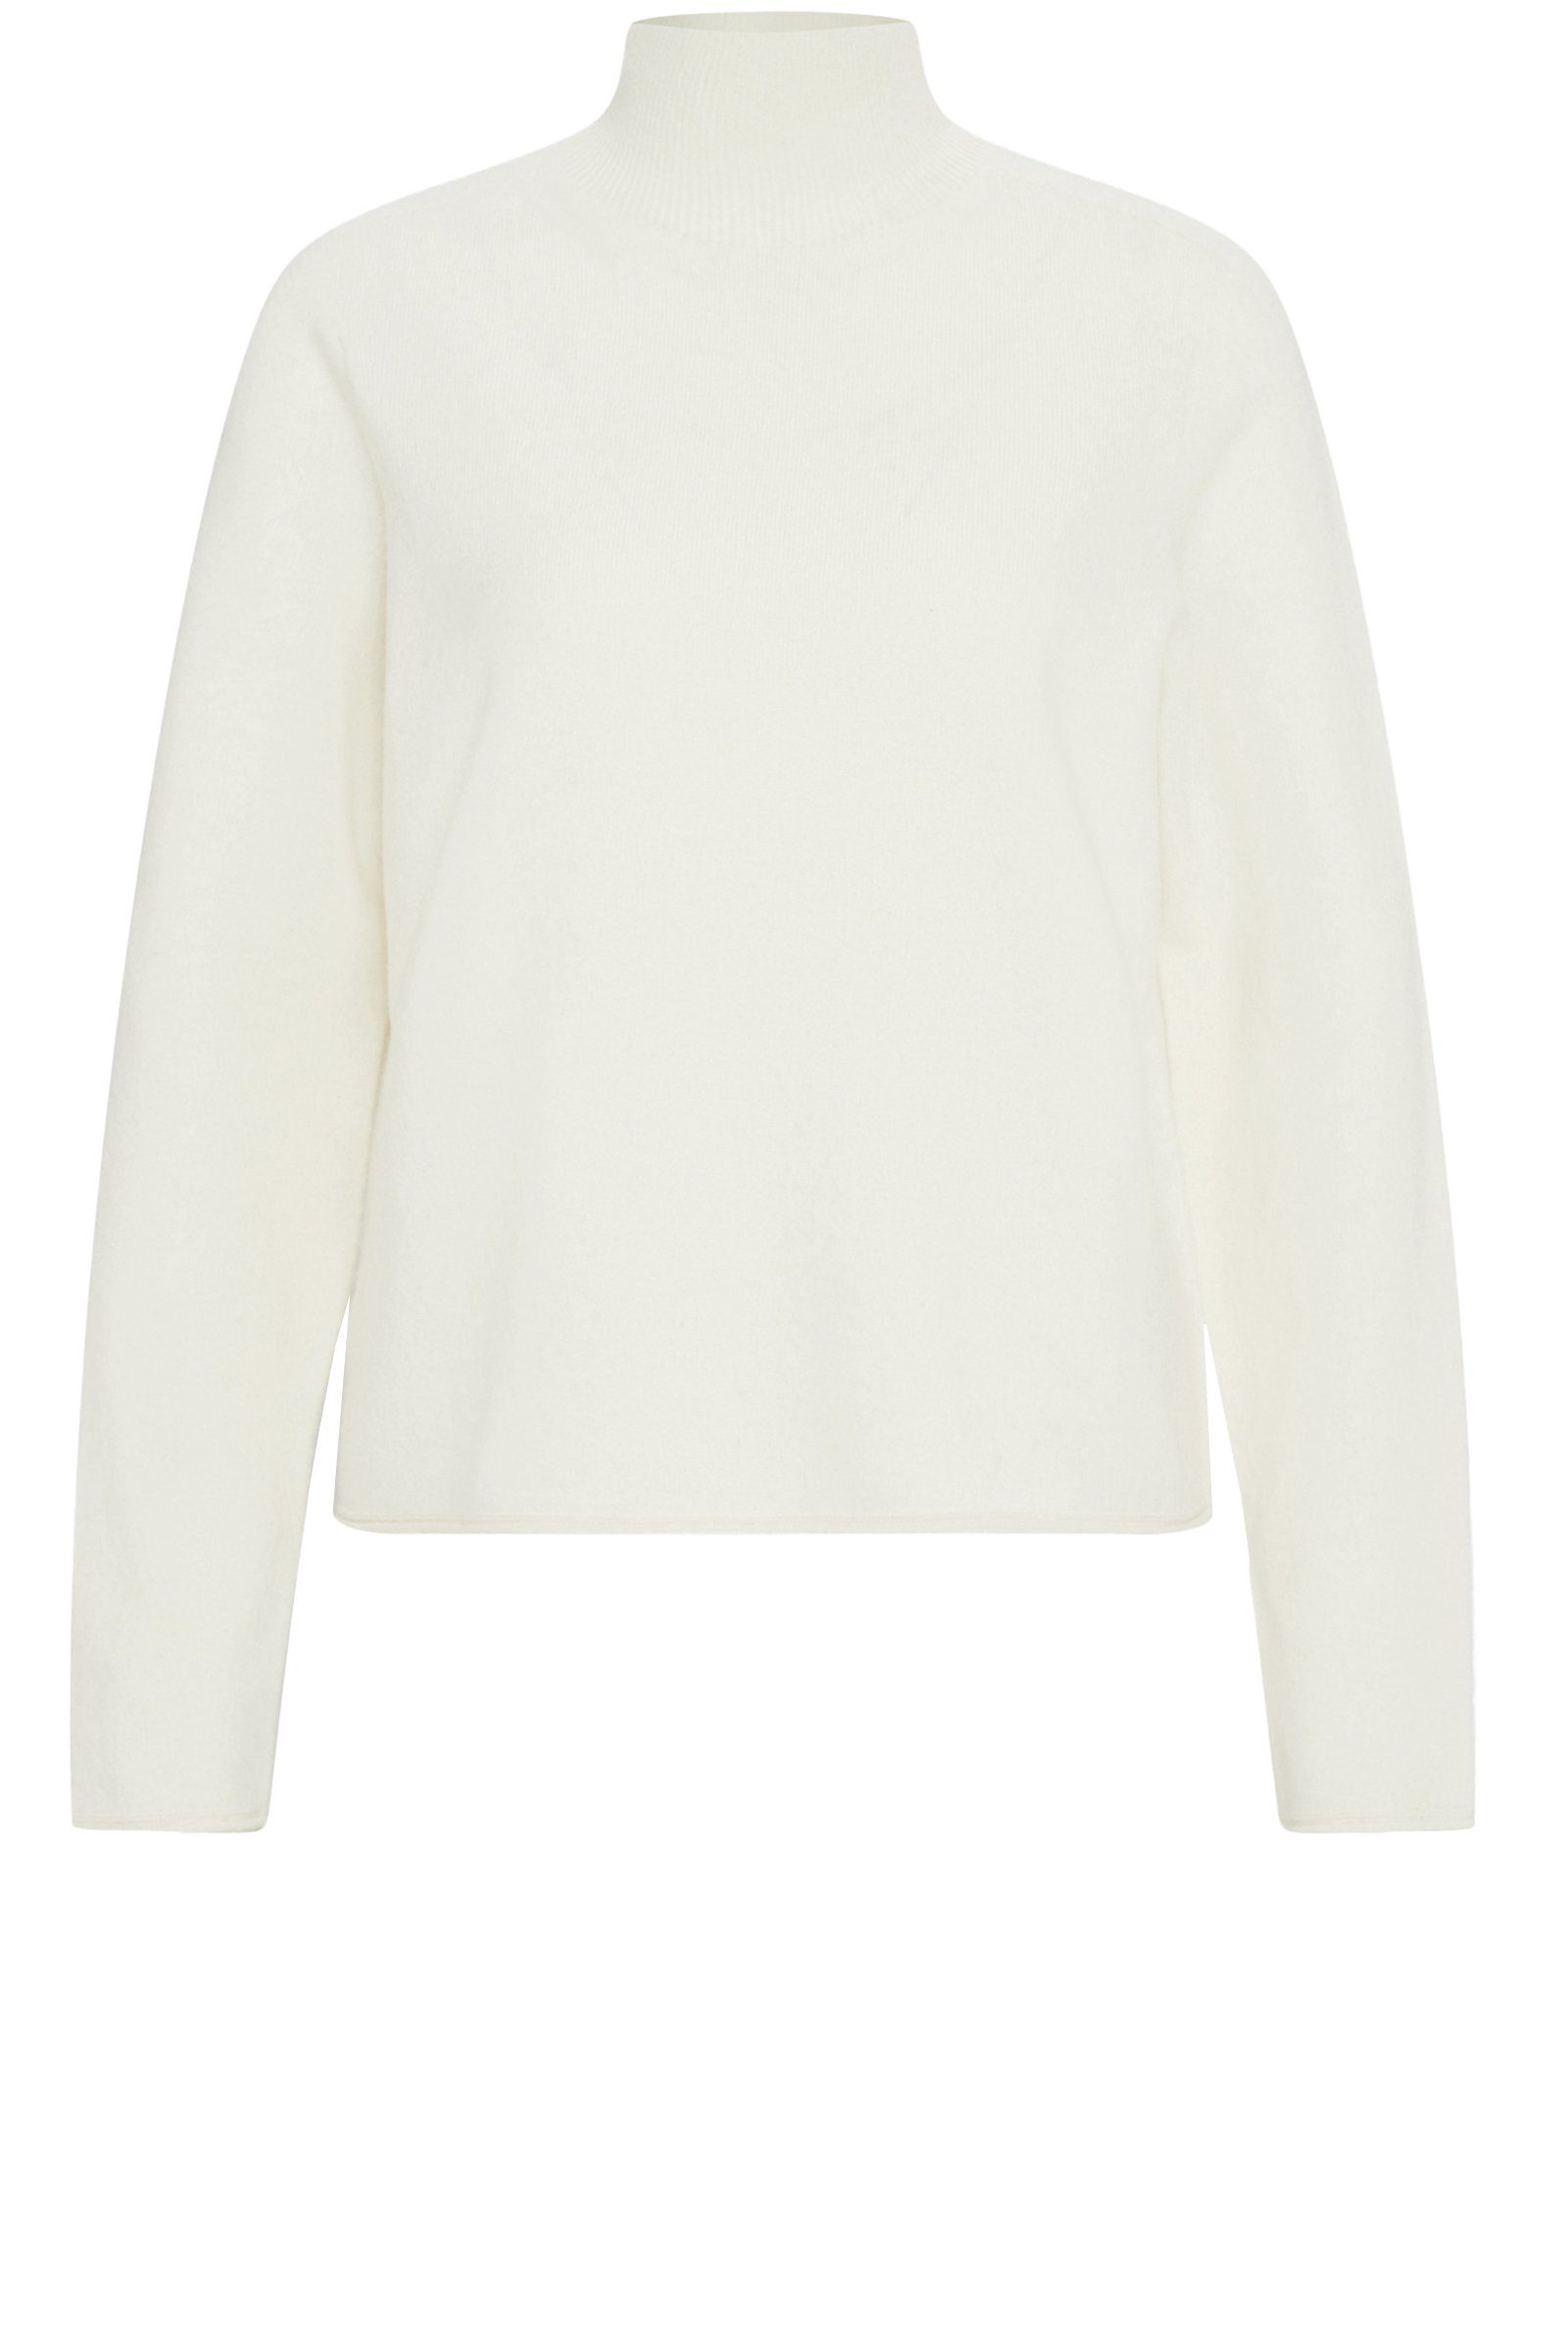 Drykorn Strickpullover Daralis (1-tlg) Off-White (1902)